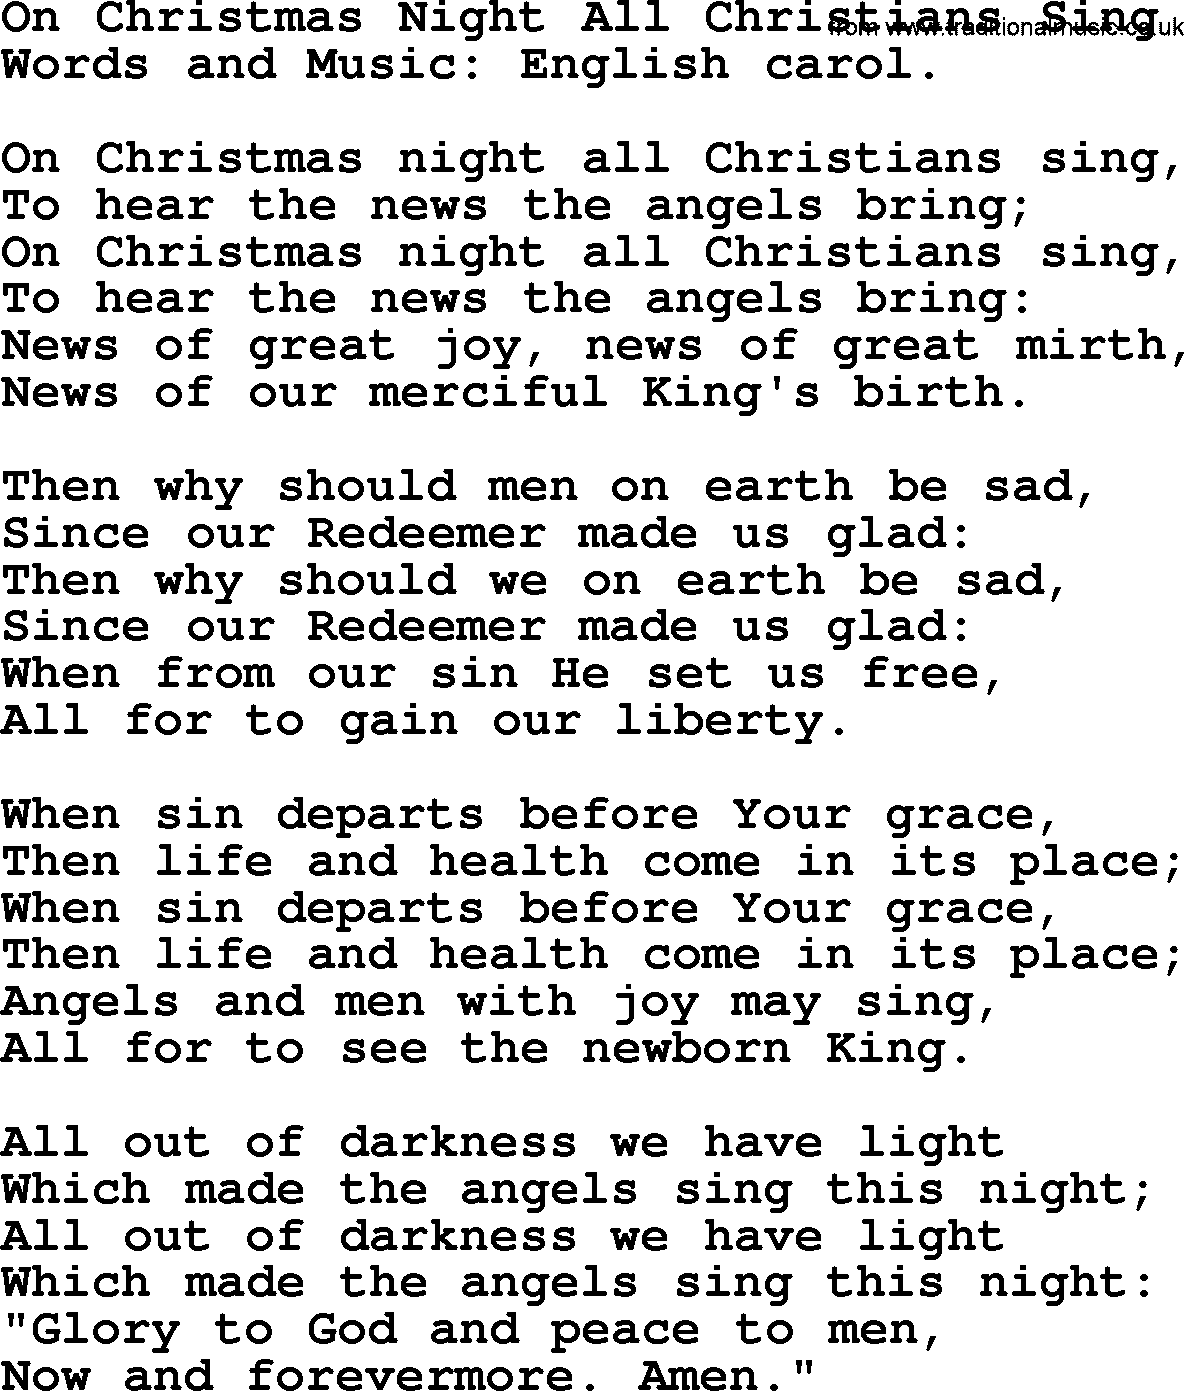 280 Christmas Hymns and songs with PowerPoints and PDF, title: On Christmas Night All Christians Sing, lyrics, PPT and PDF